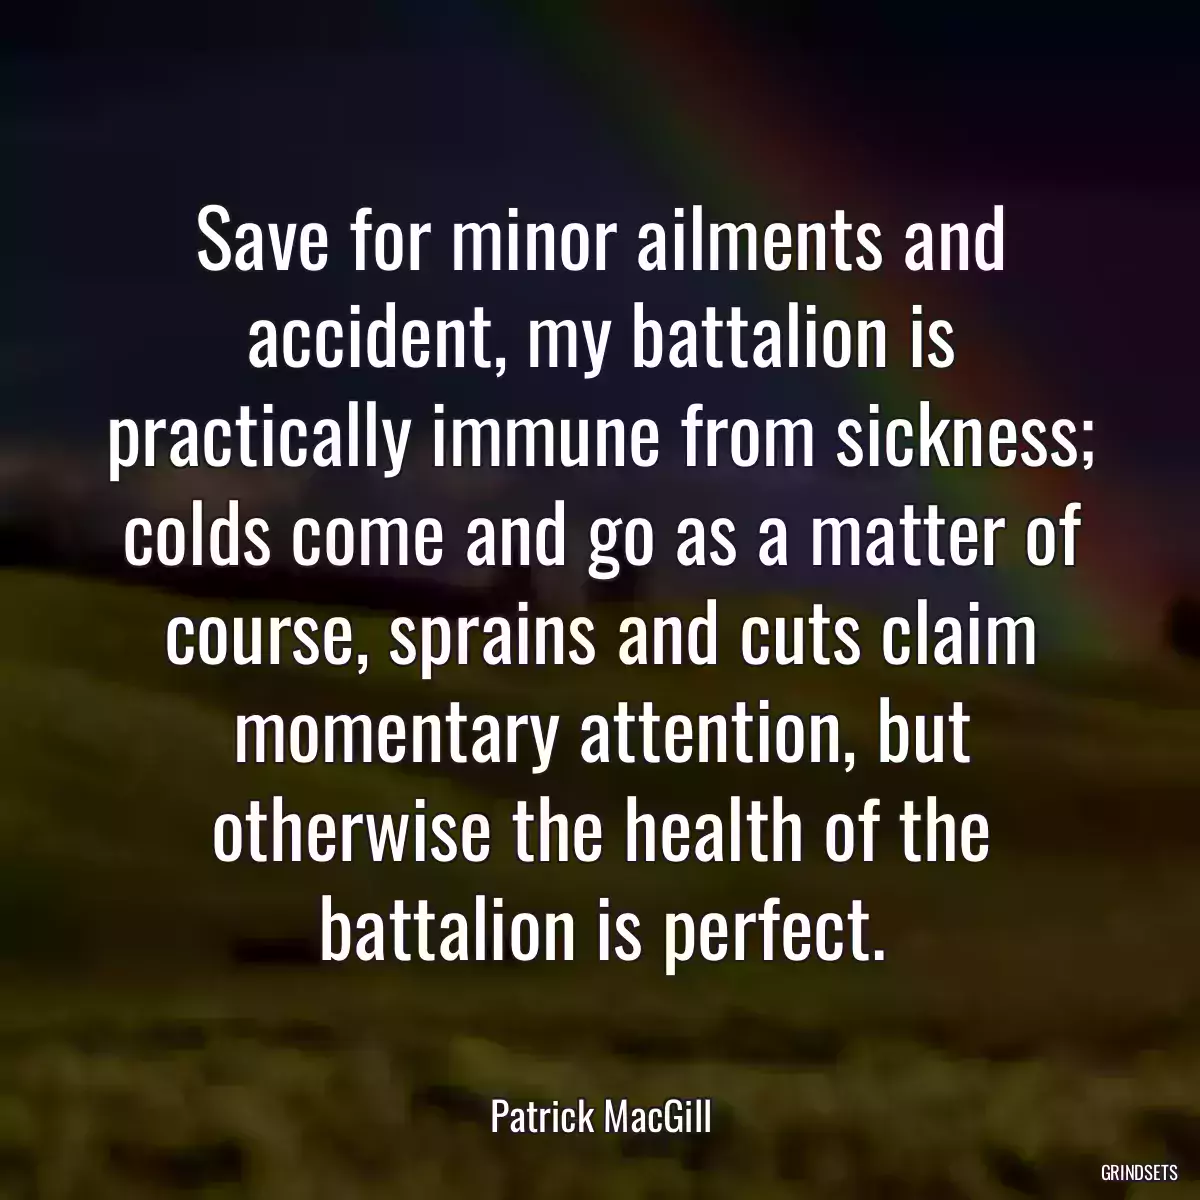 Save for minor ailments and accident, my battalion is practically immune from sickness; colds come and go as a matter of course, sprains and cuts claim momentary attention, but otherwise the health of the battalion is perfect.